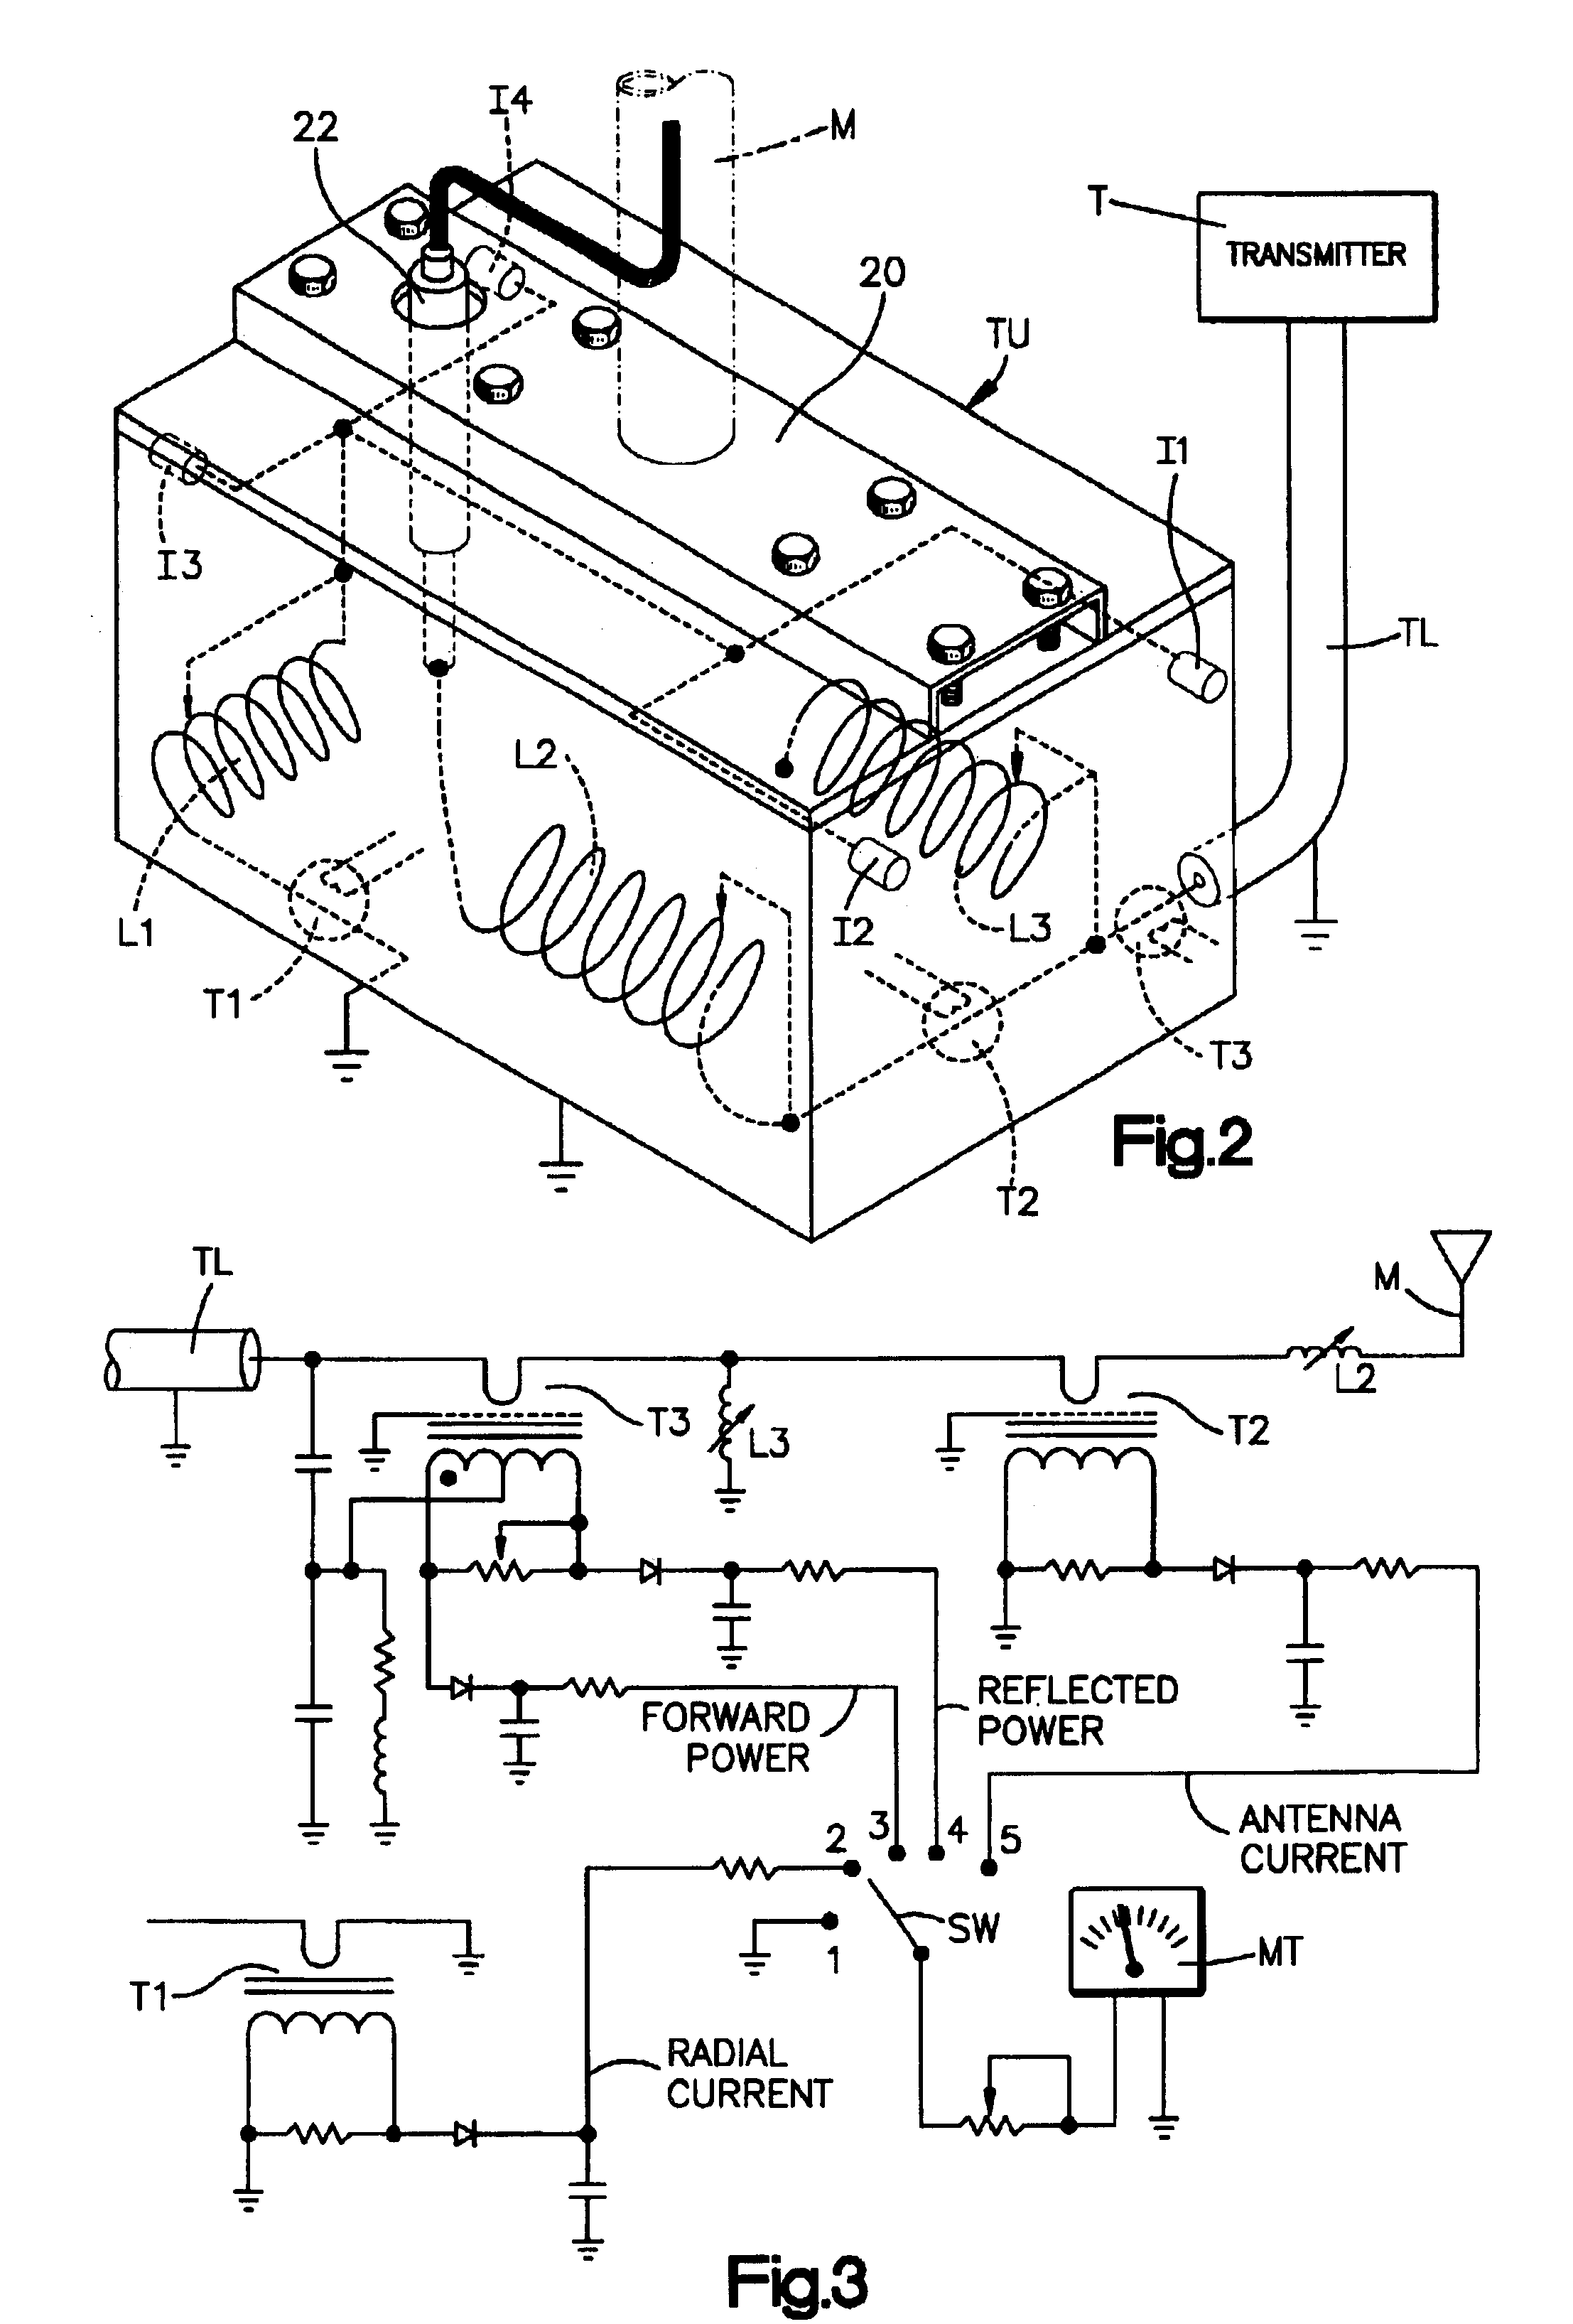 Antenna system utilizing elevated, resonant, radial wires